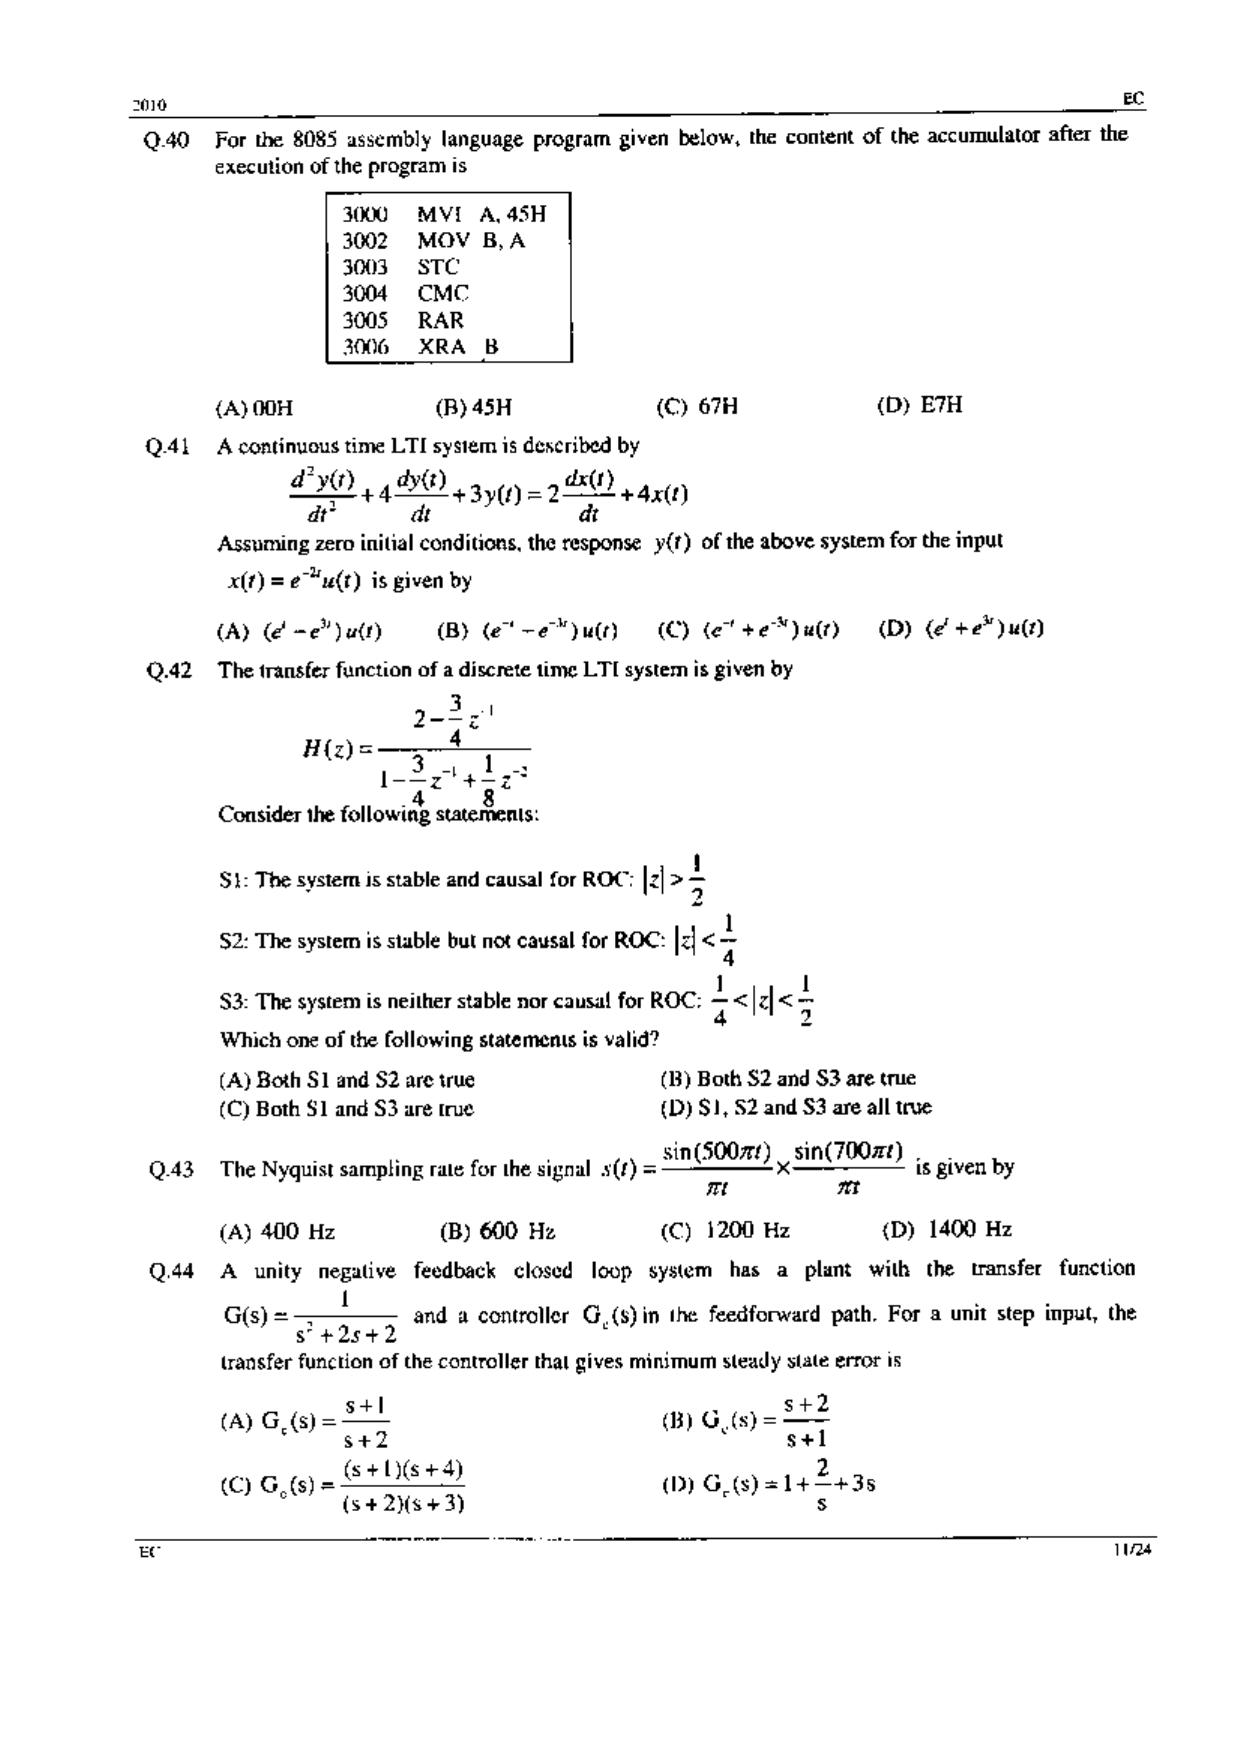 GATE 2010 Electronics and Communication Engineering (EC) Question Paper with Answer Key - Page 11